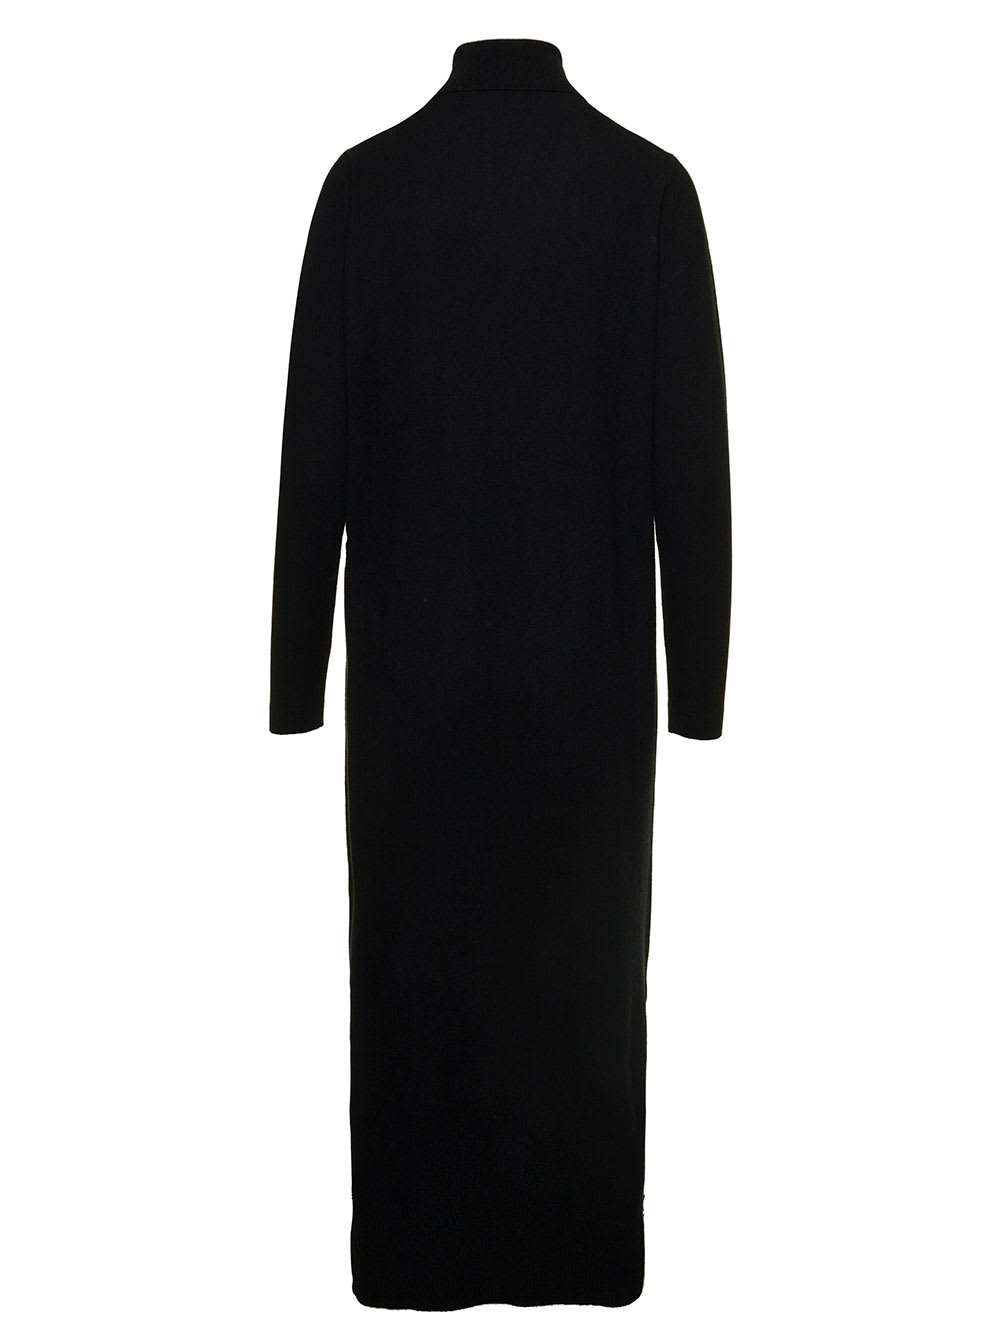 ALLUDE BLACK HIGH-NECK MAXI DRESS IN WOOL AND CASHMERE WOMAN ALLUDE 